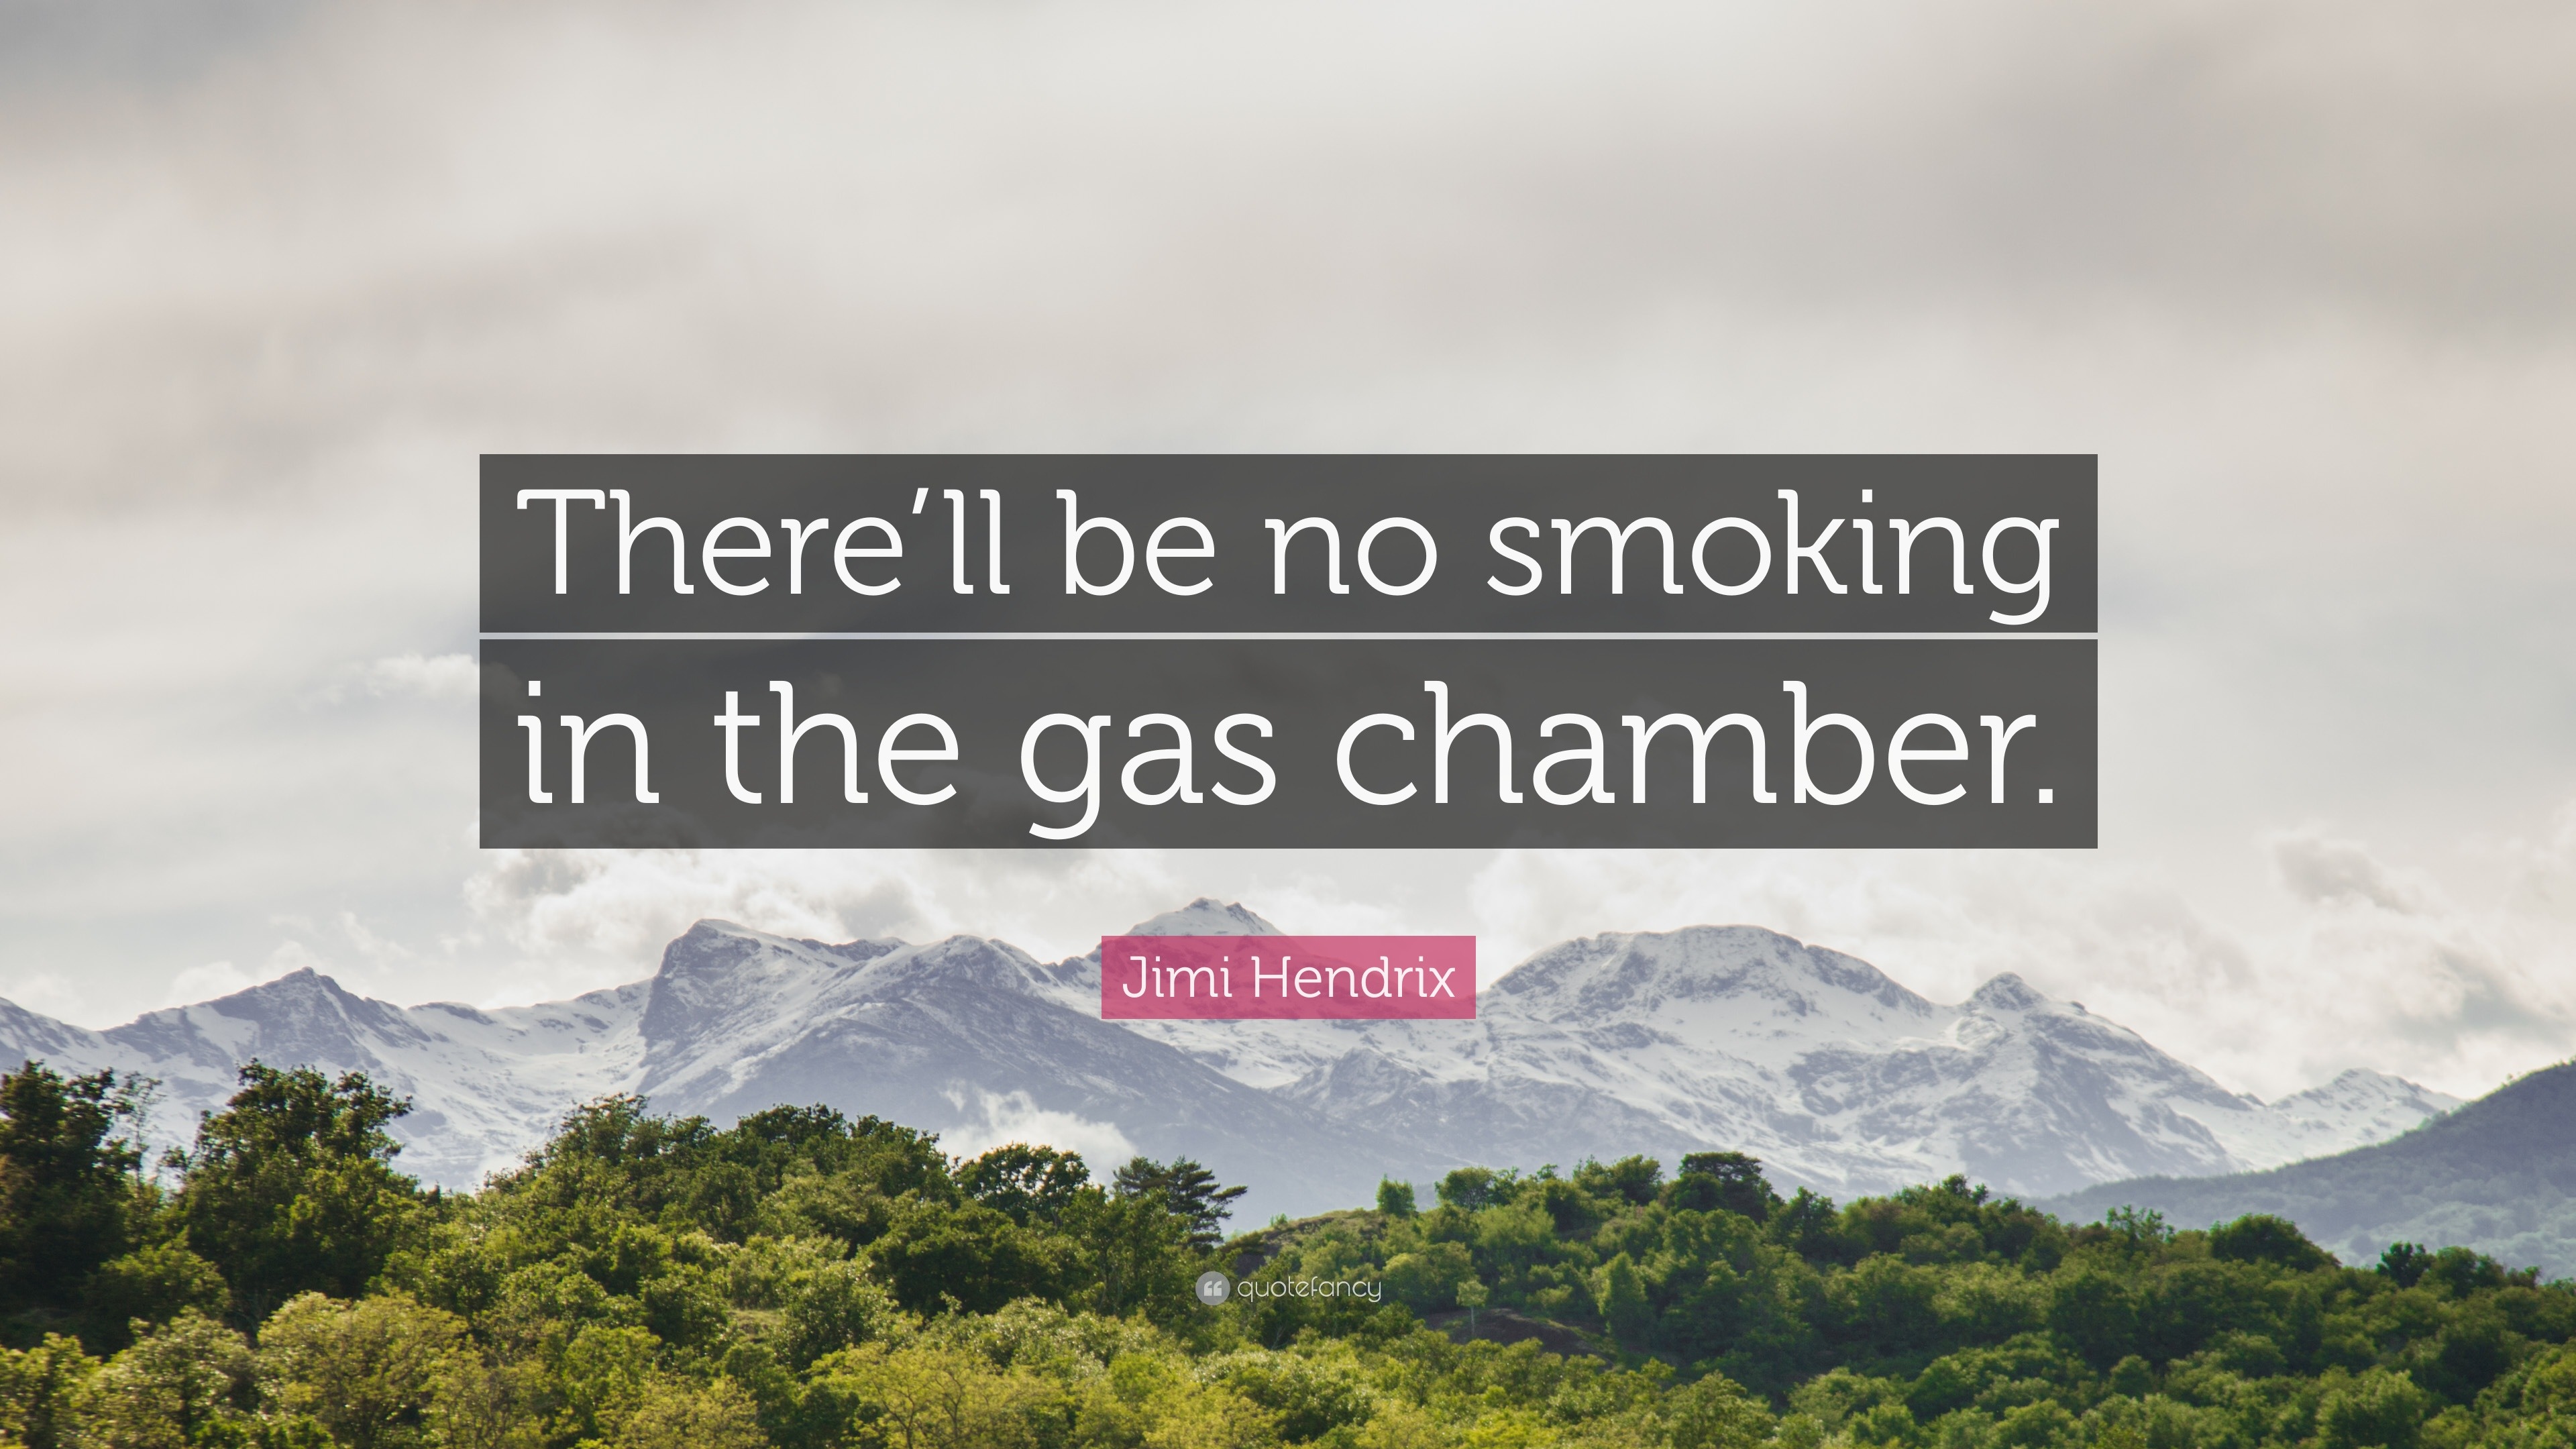 Jimi Hendrix Quote: “There'll be no smoking in the gas chamber.”